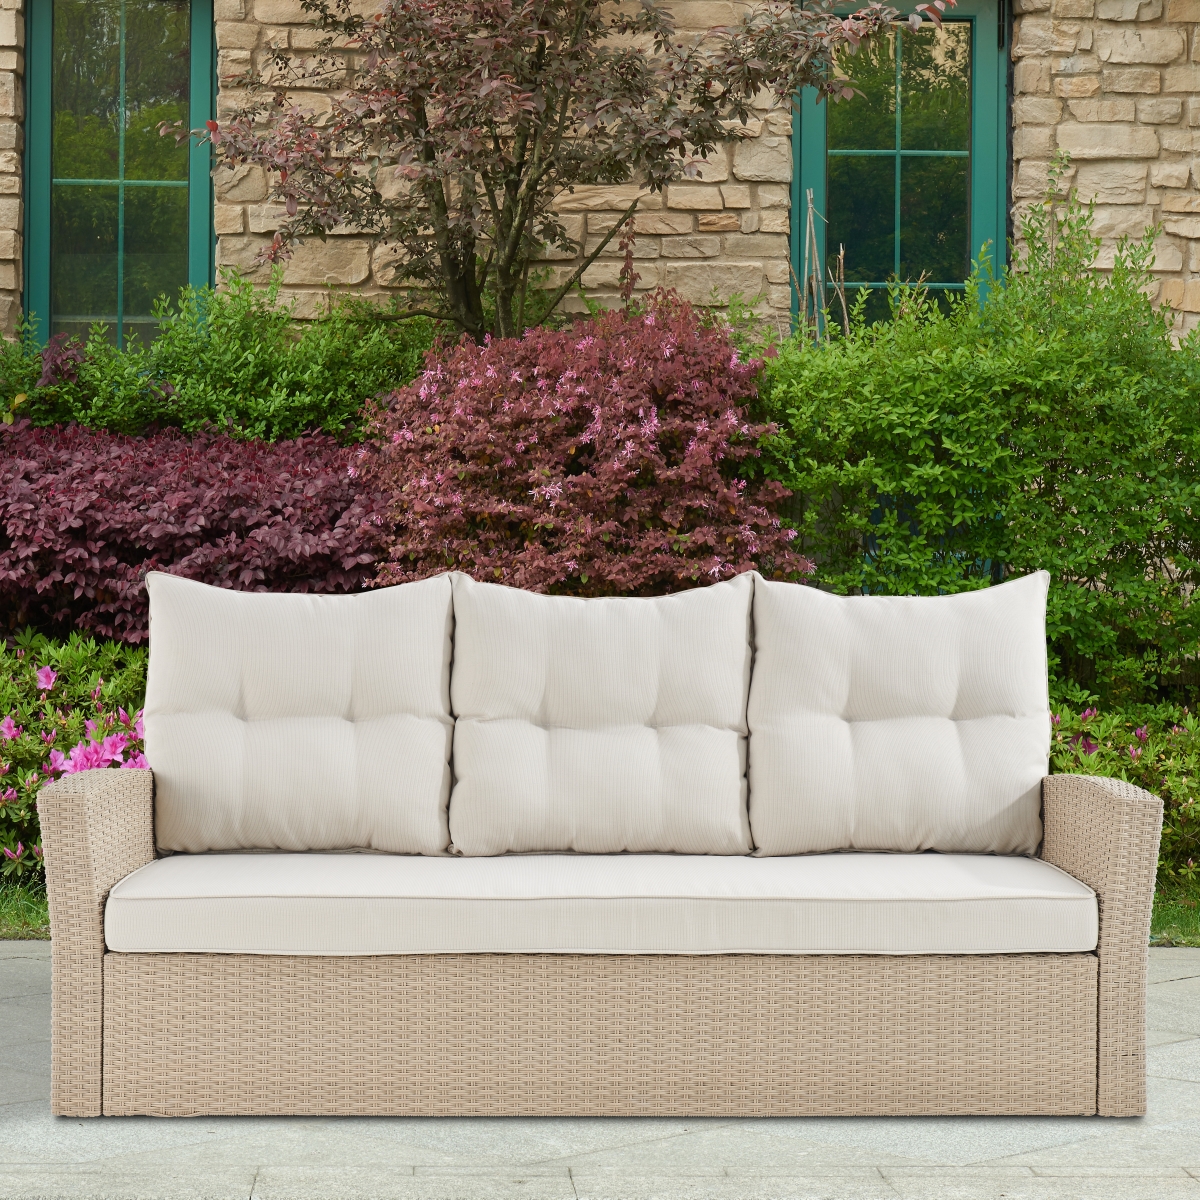 Picture of Alaterre AWWC0445CC Canaan All-Weather Wicker Outdoor Sofa with Cushions - Cream